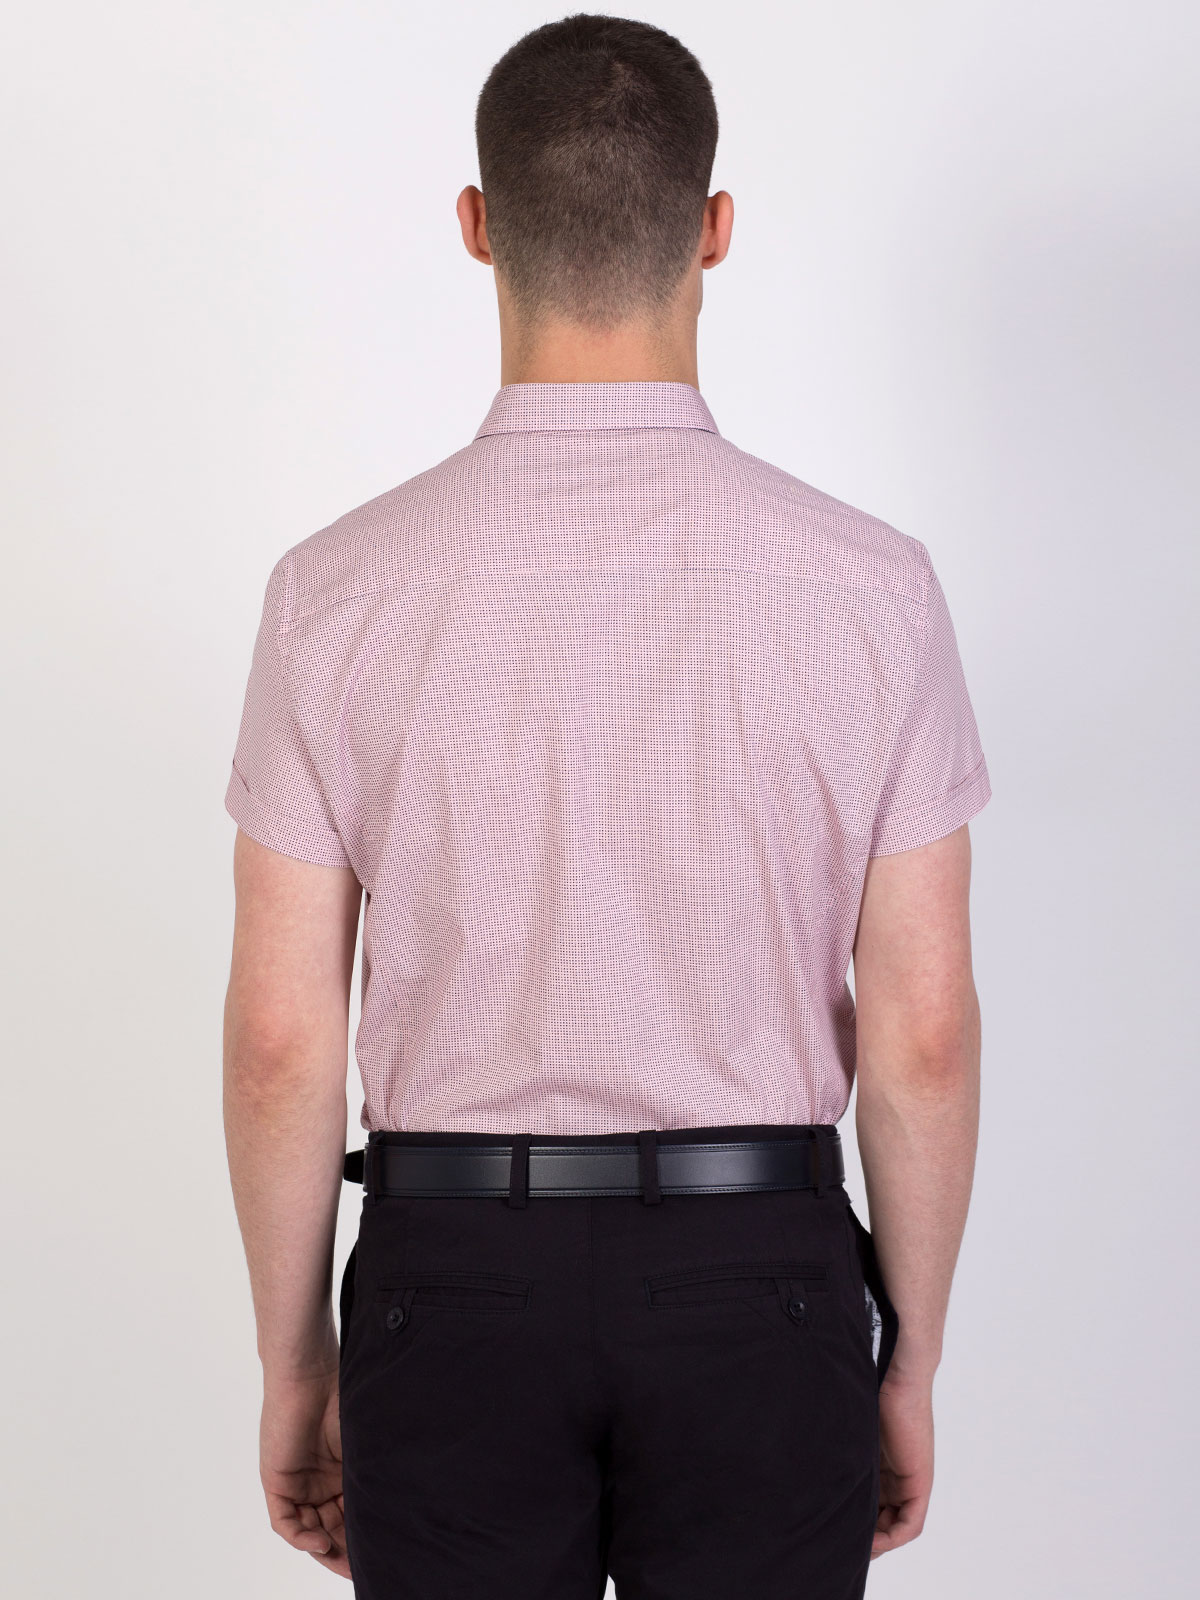 Fitted pink shirt for small figures - 80201 € 11.25 img3